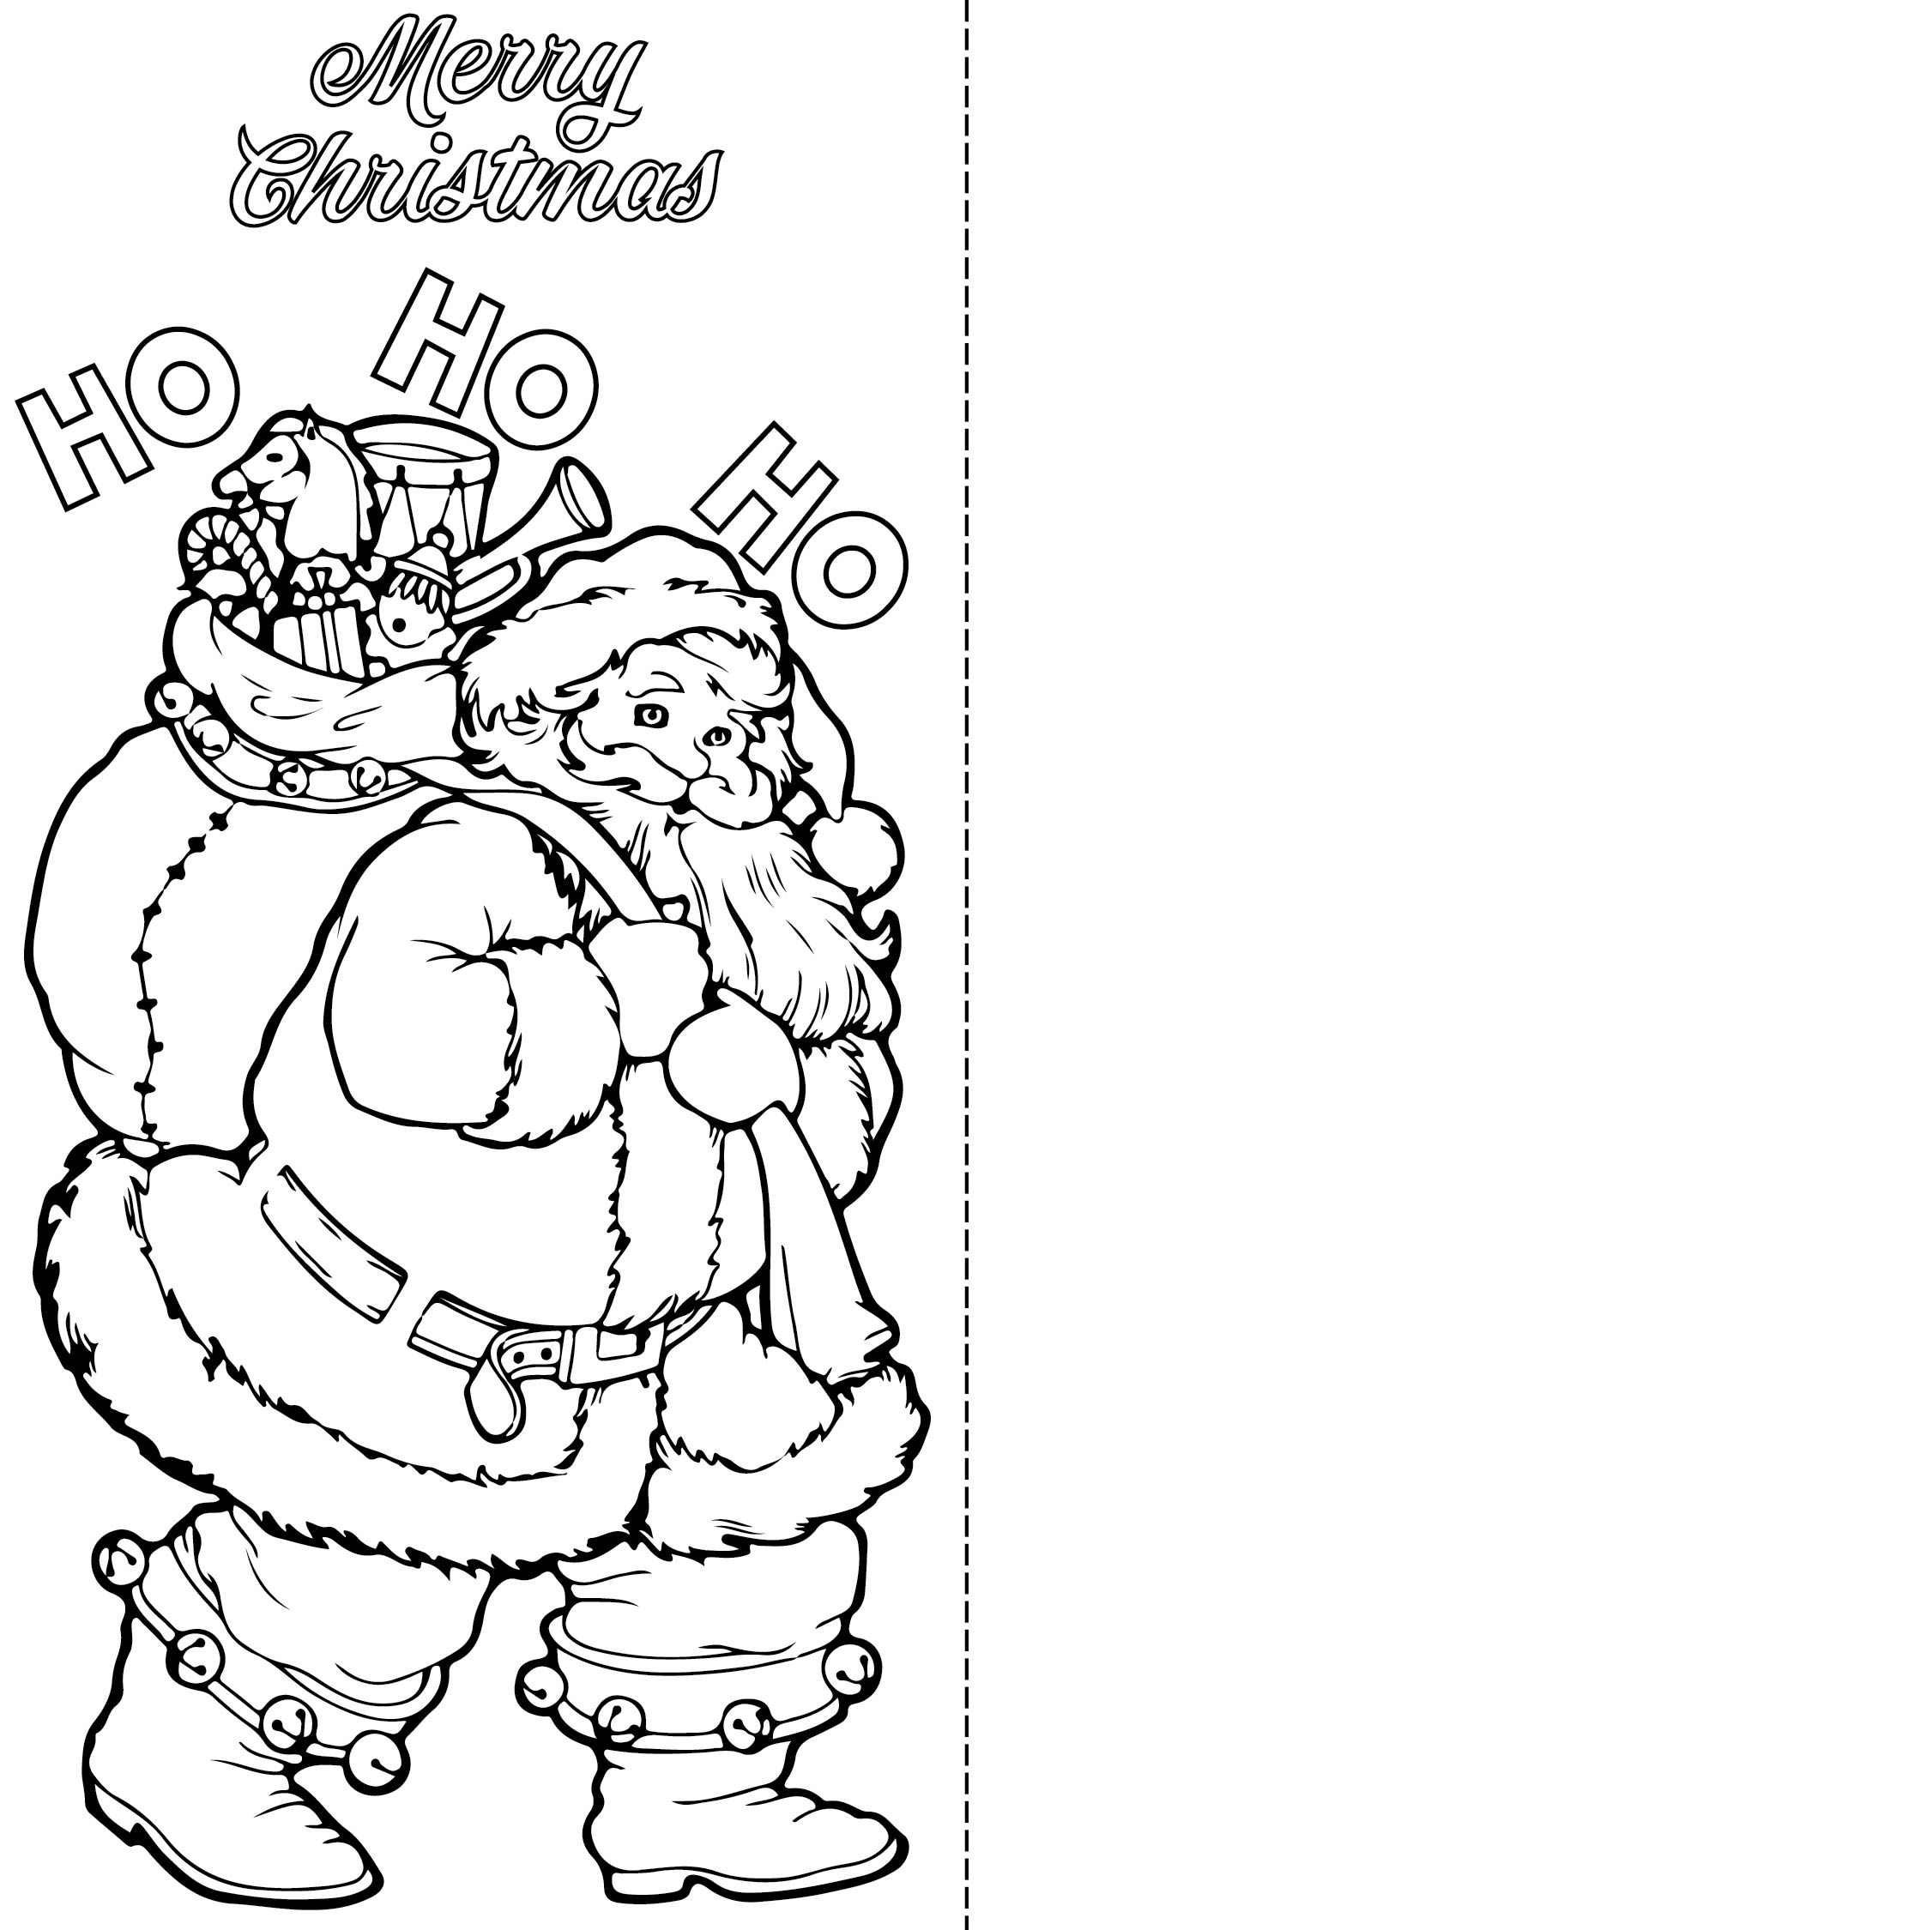 8-best-images-of-printable-christmas-cards-to-color-free-printable-christmas-cards-kids-to